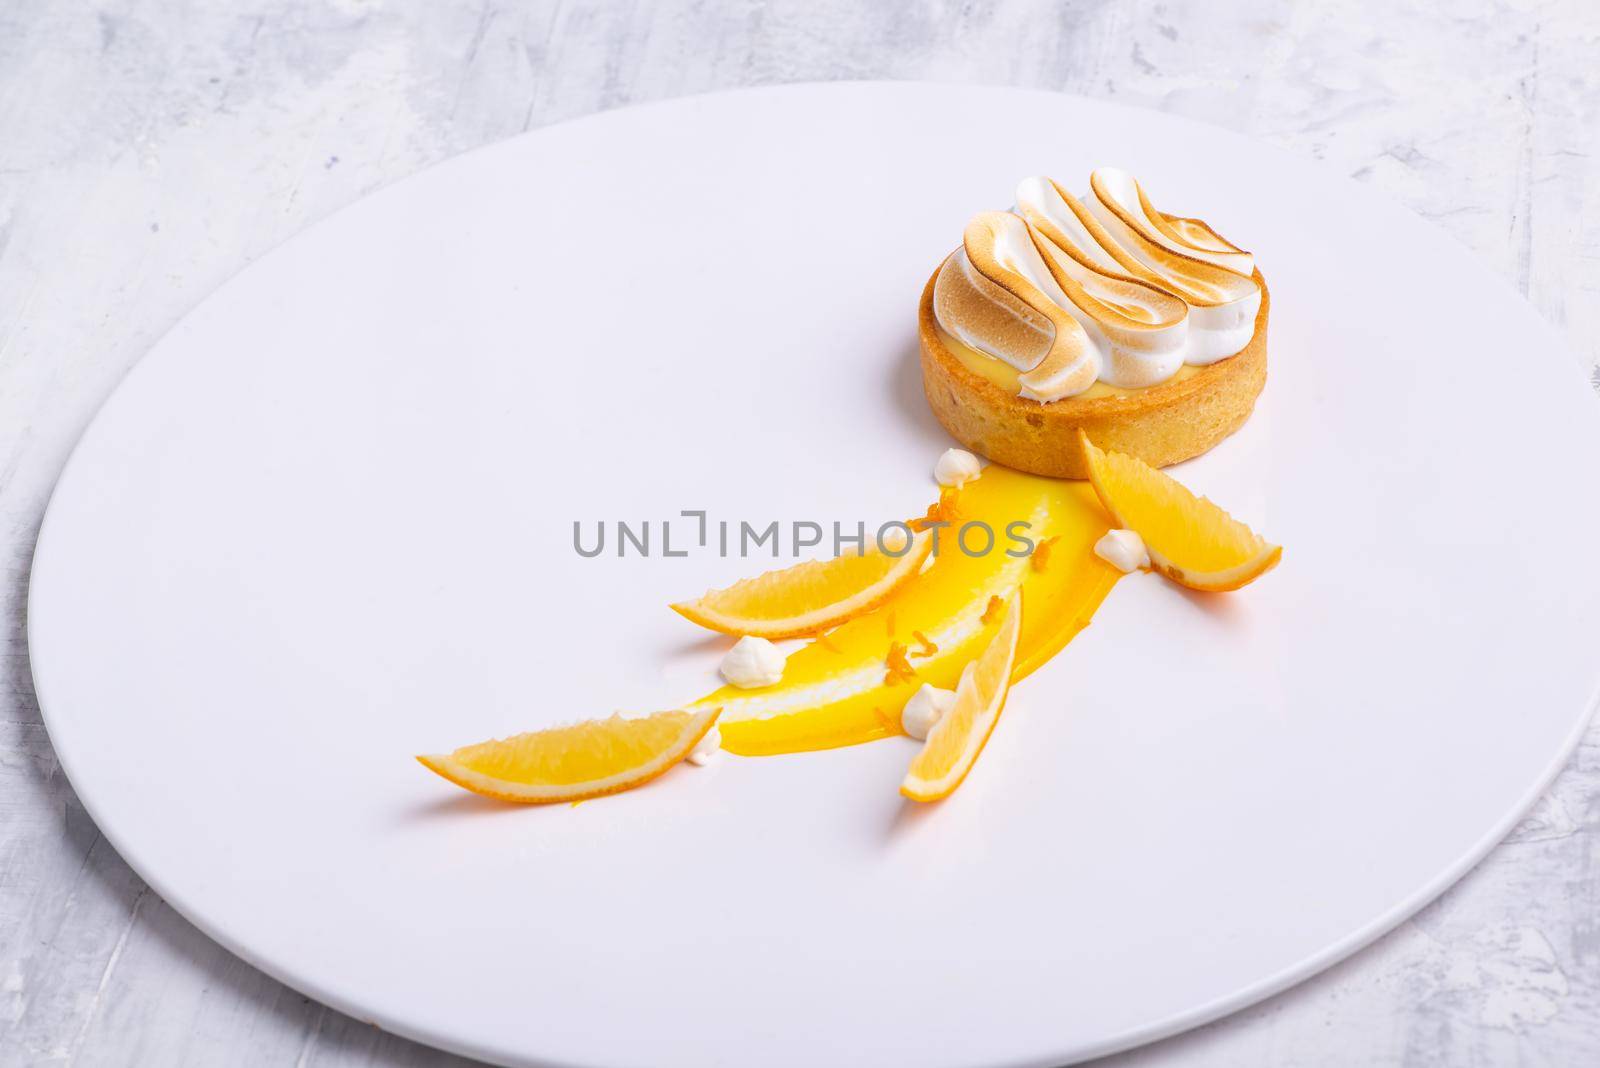 The appetizing lemon tartlets with meringue served on a white plate